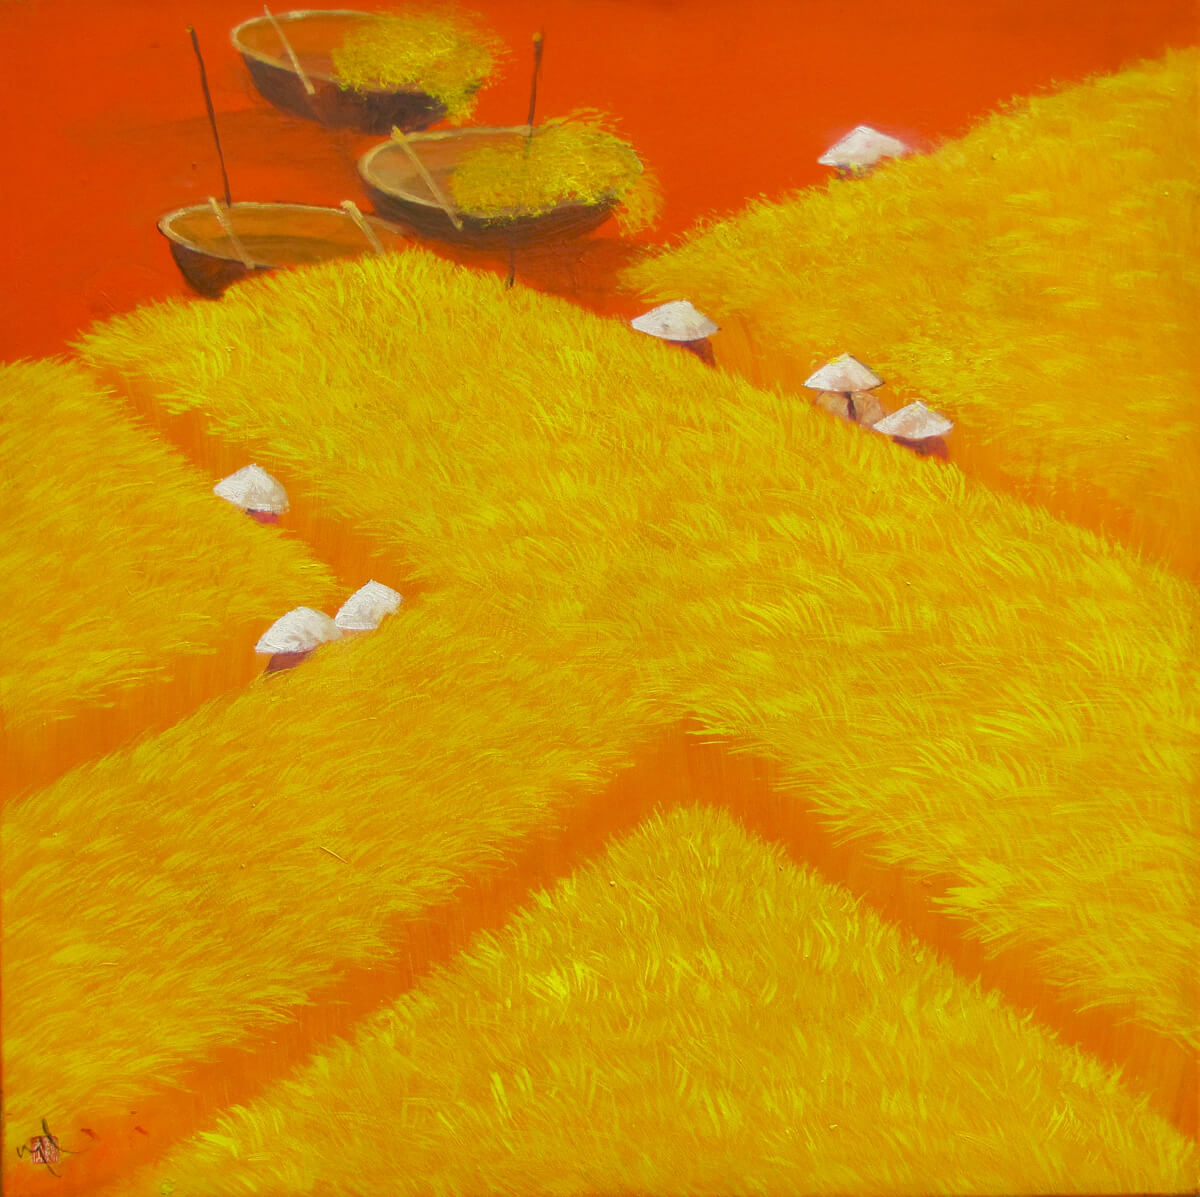 Working on the rice field 01-Vietnamese Painting